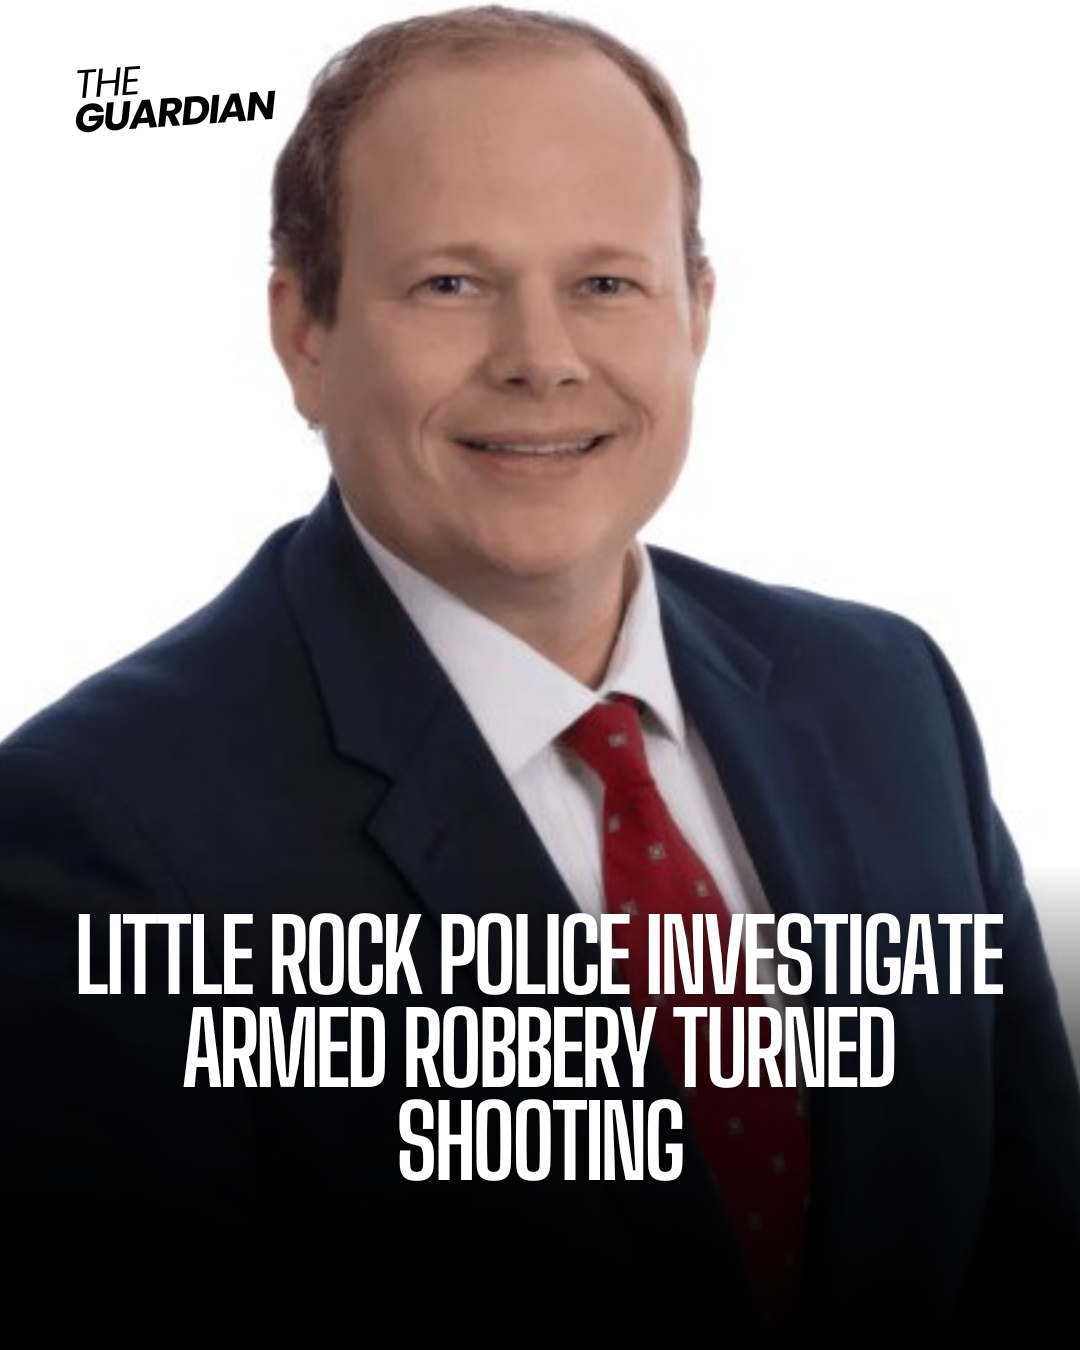 Little Rock police are aggressively investigating an armed robbery that turned into a shooting on Wednesday.